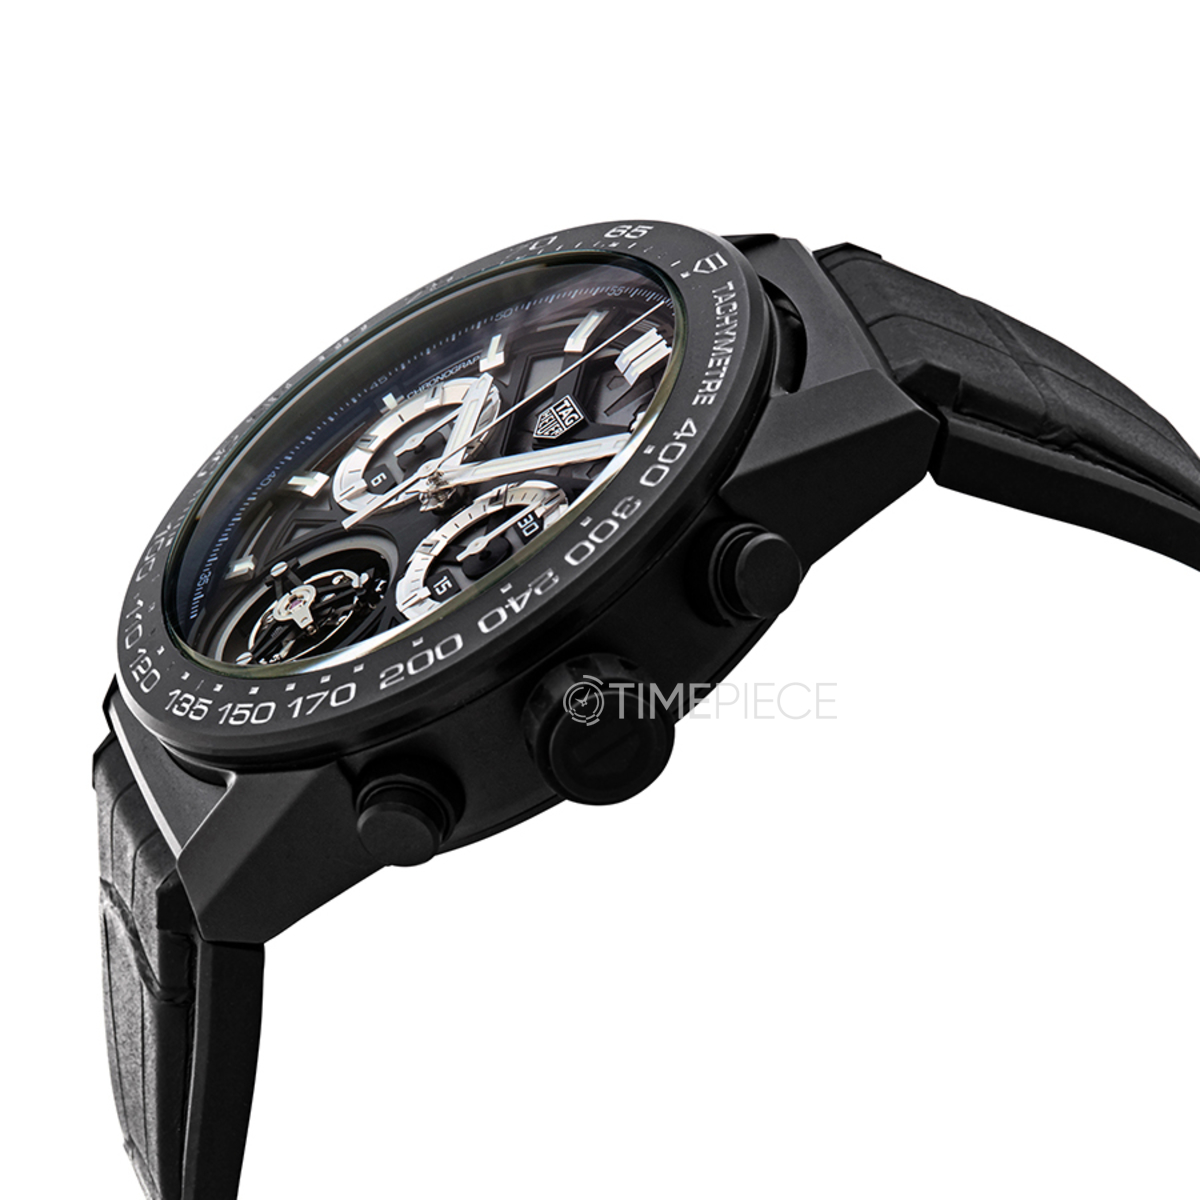 Tag Heuer Carrera Chronograph Automatic Black Dial Mens Watch  CBG2090.BH0661 for Men